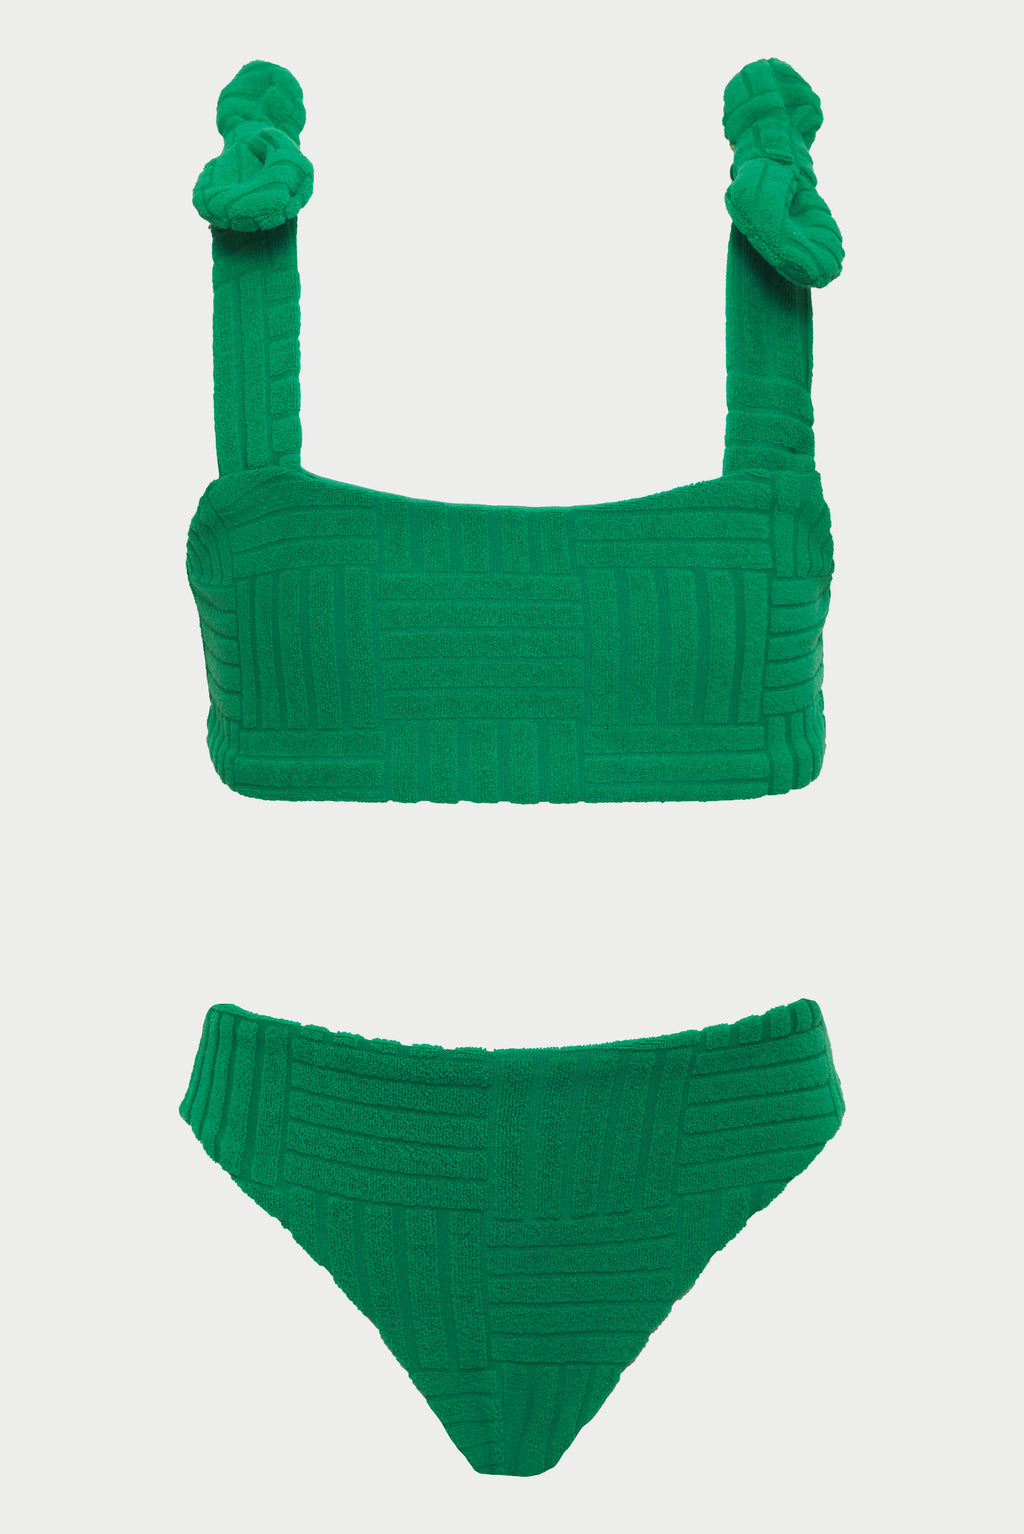 Little Stella Two Piece Jelly Bean Green Terry